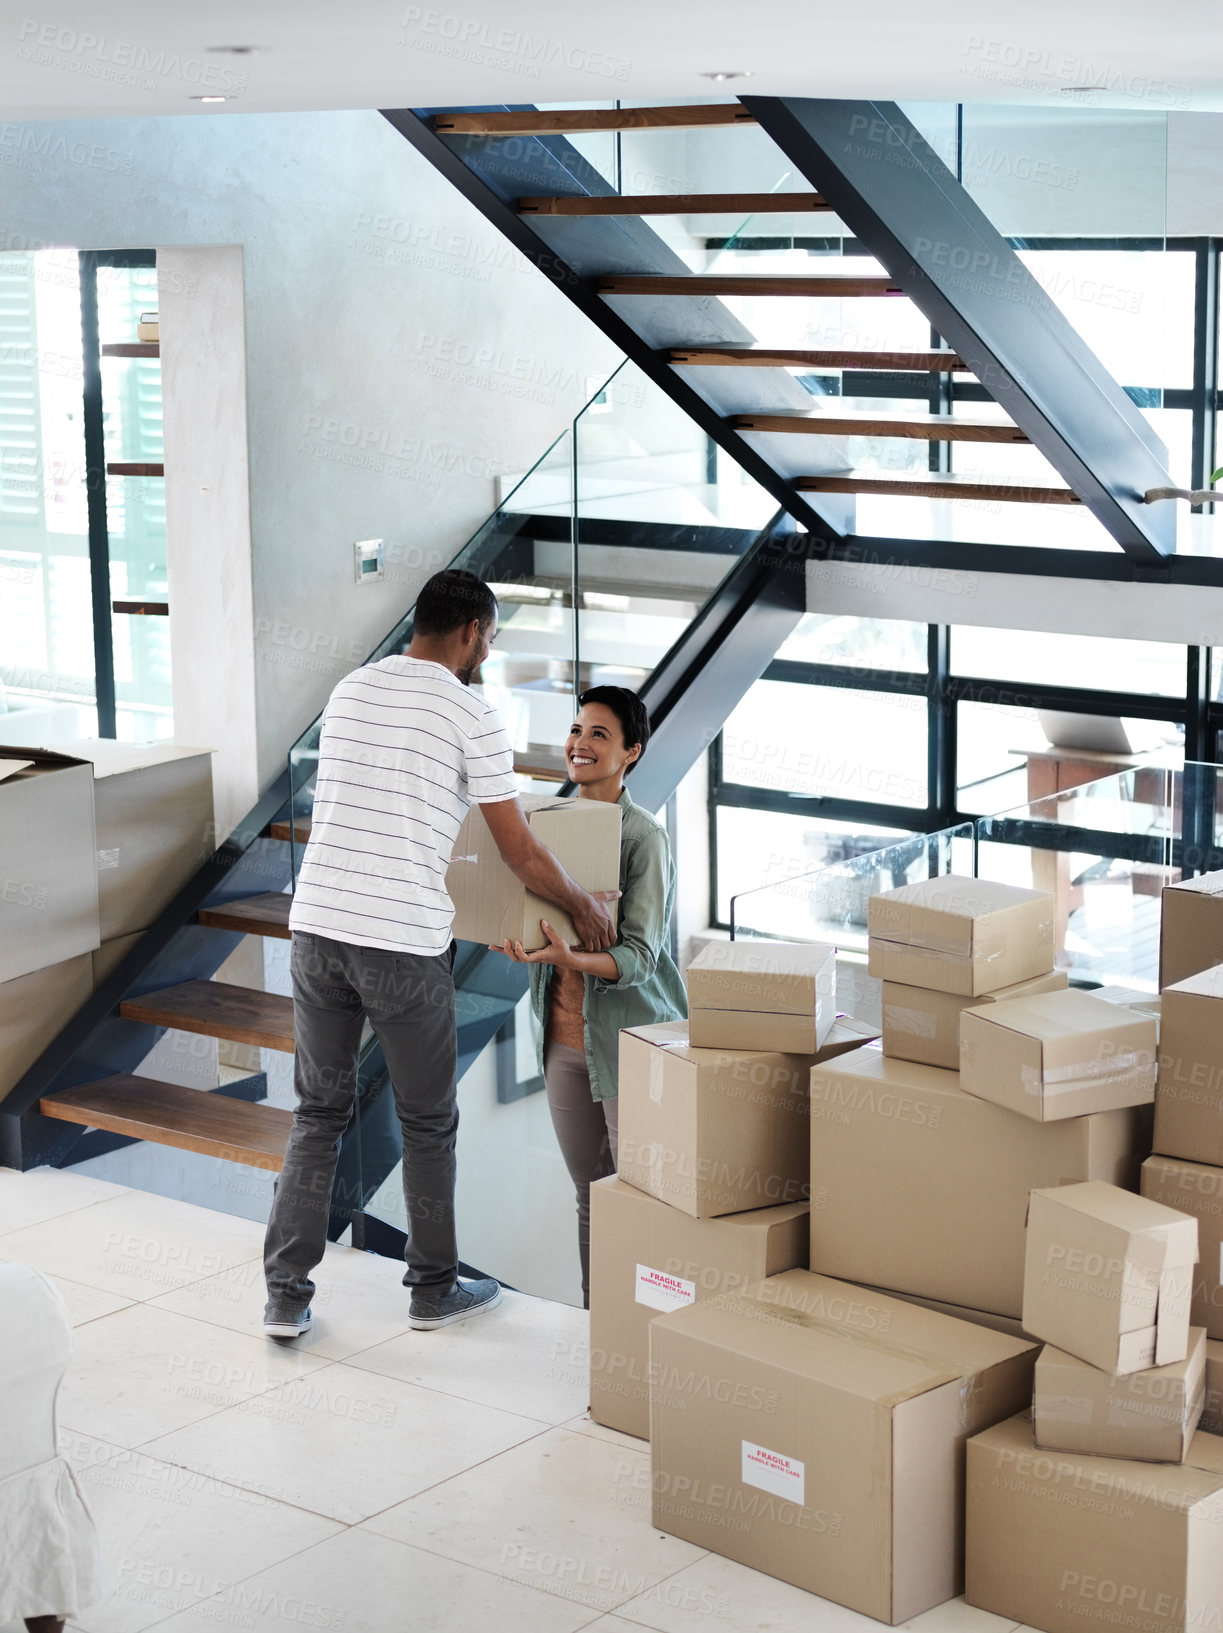 Buy stock photo Shot of a happy young couple passing boxes to each other while moving into their new home